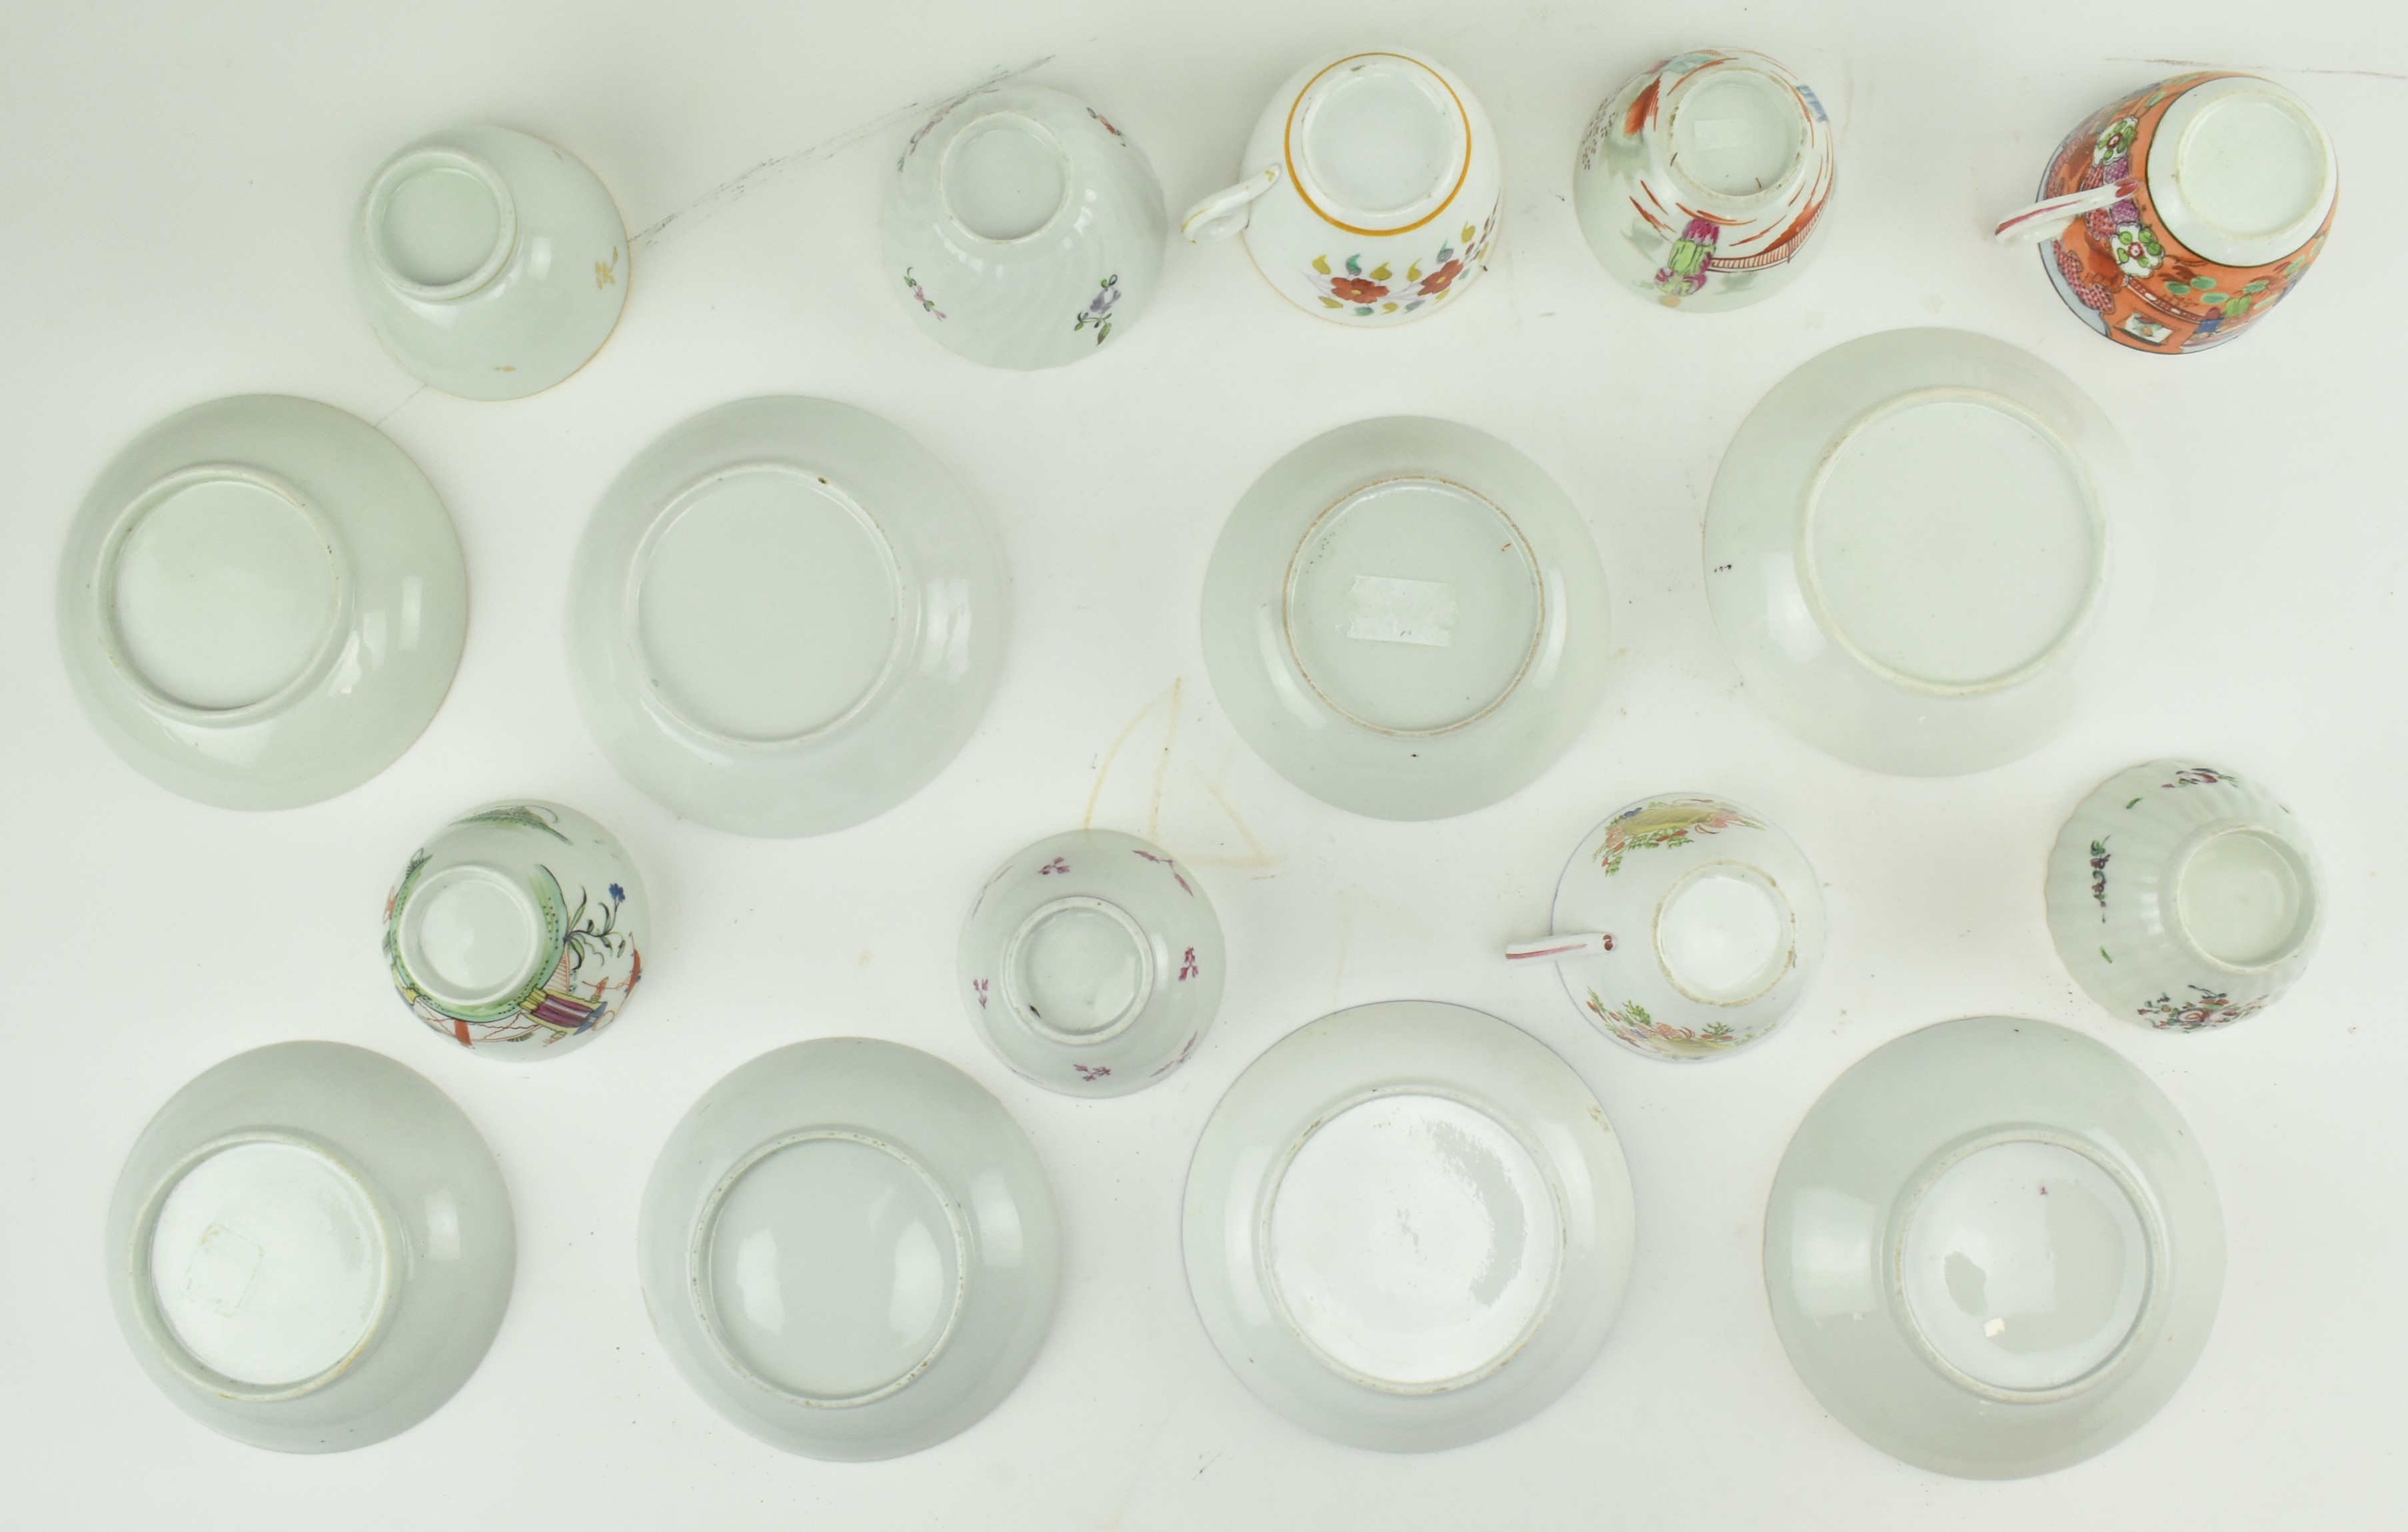 GROUP OF 18TH CENTURY NEWHALL PORCELAIN CUPS AND SAUCERS - Image 7 of 7